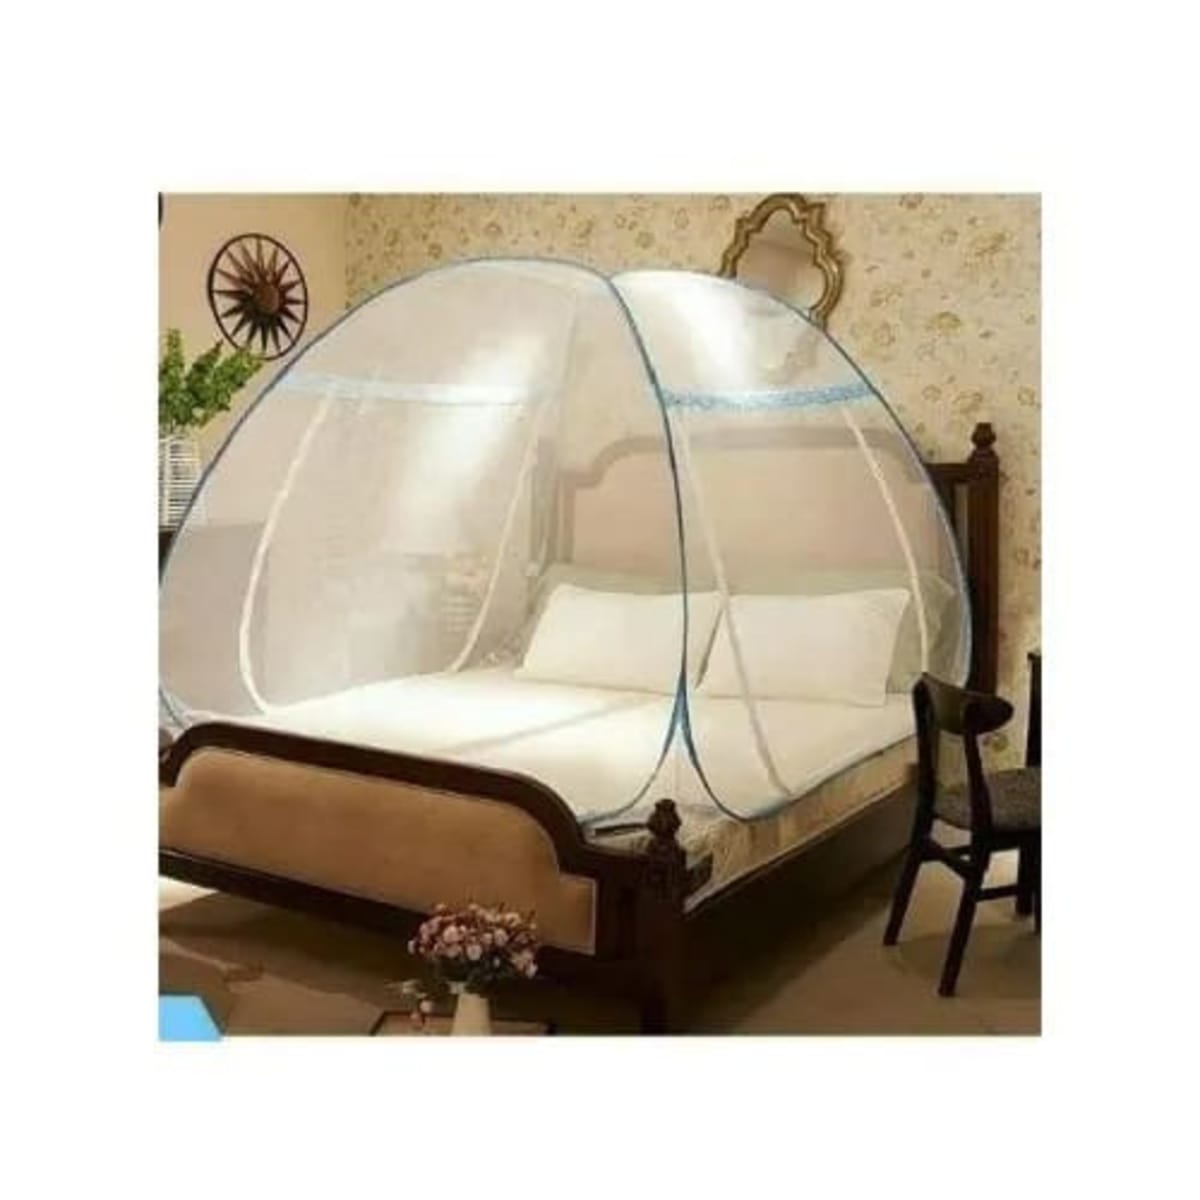 Foldable Mosquito Net - 7Ft X 7Ft